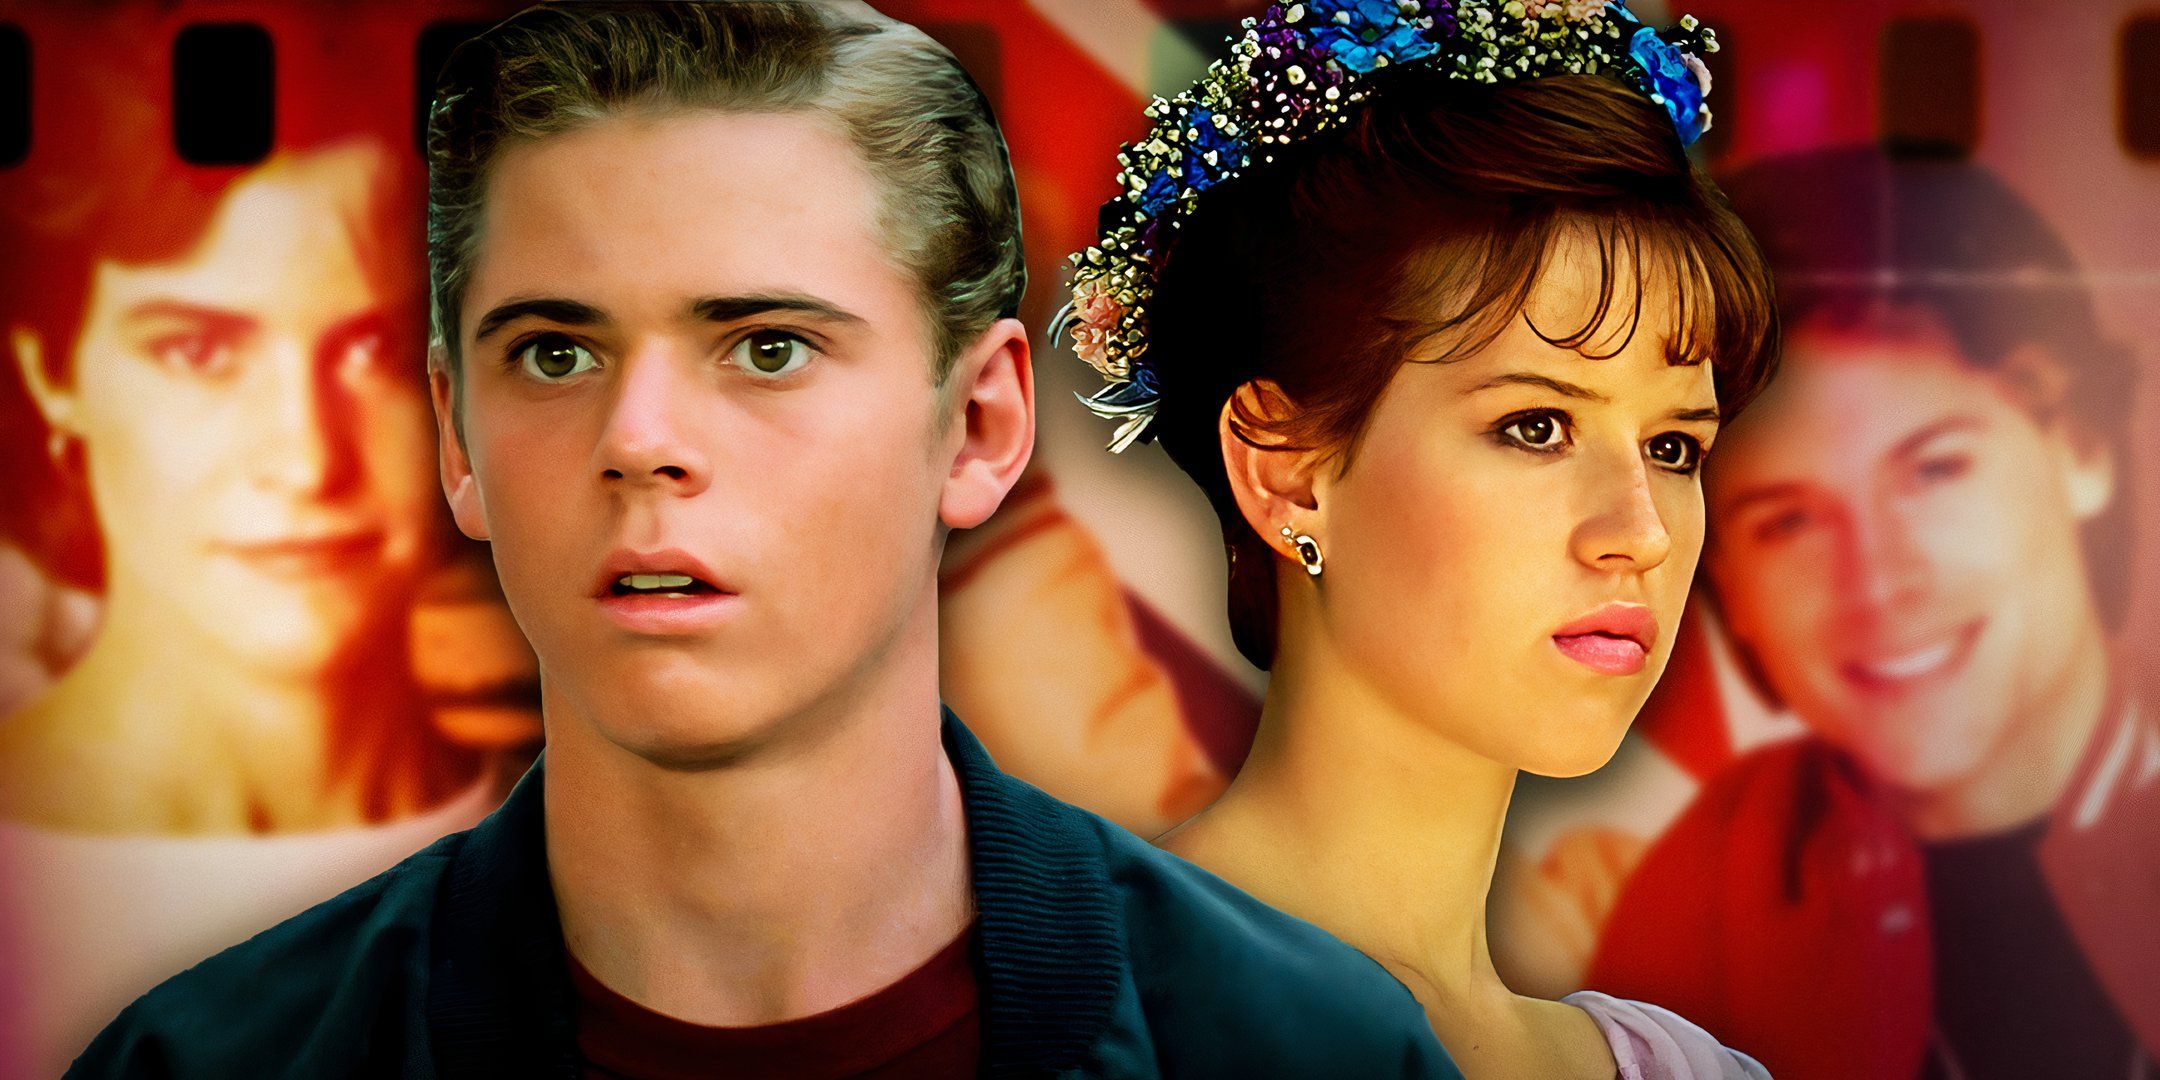 C. Thomas Howell as Ponyboy Curtis from The Outsiders and (Molly Ringwald as Samantha) from Sixteen Candles